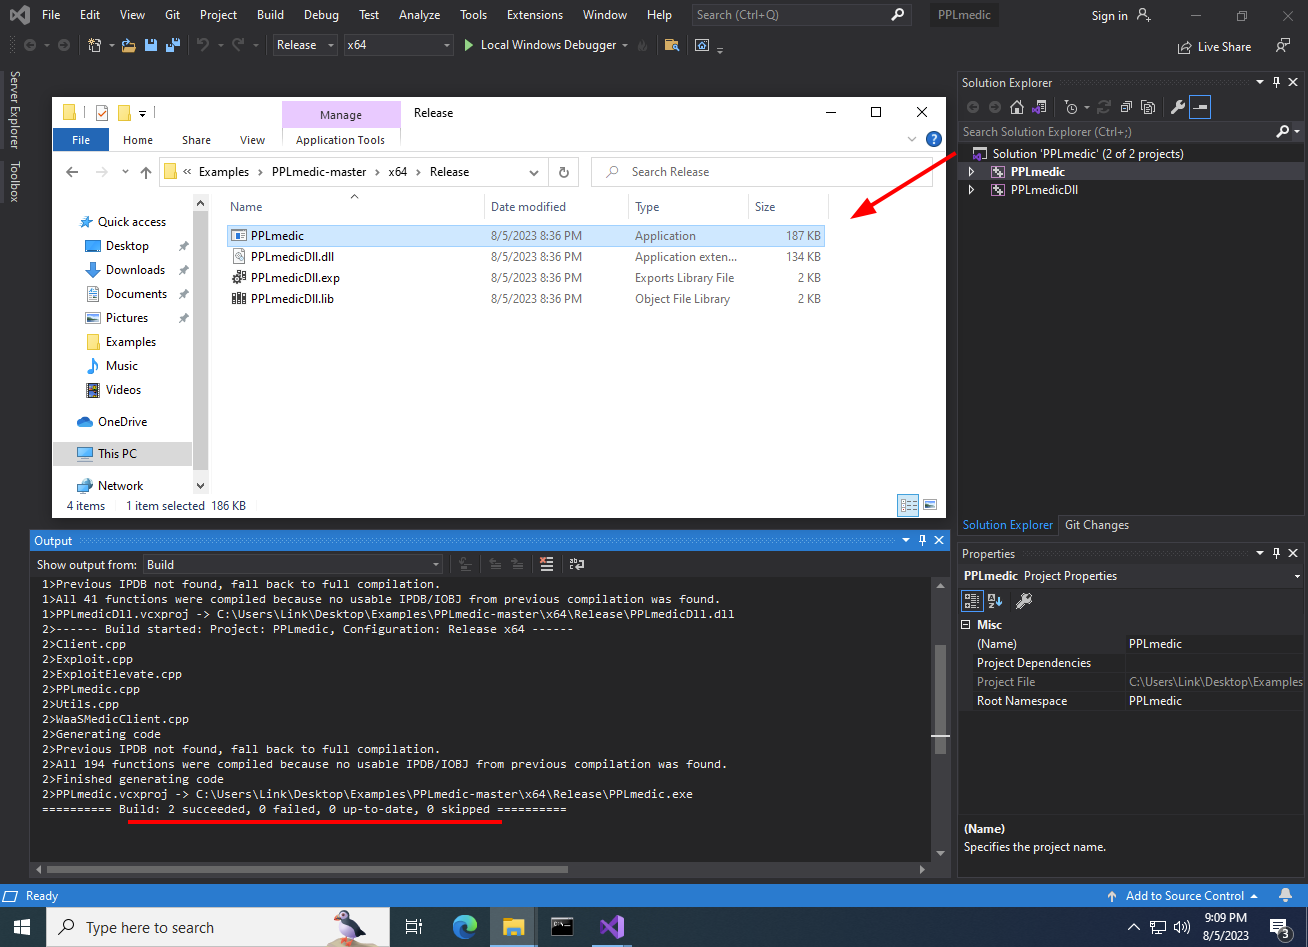 using PPLmedic, build the visual studio shown here by White Oak Security